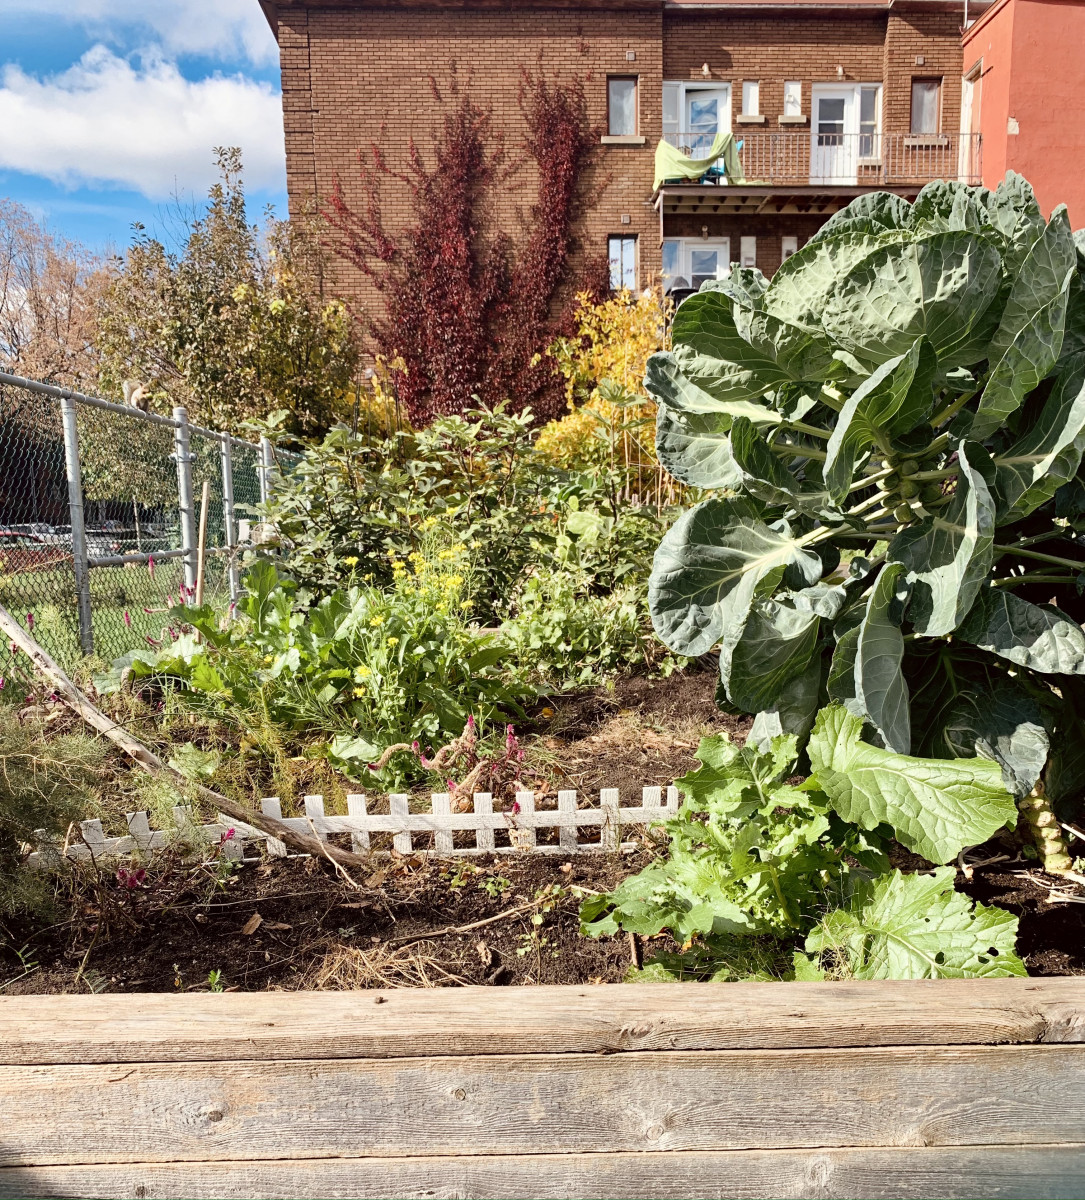 Raised beds of vegetables in the foreground in front of brick building toward the back.